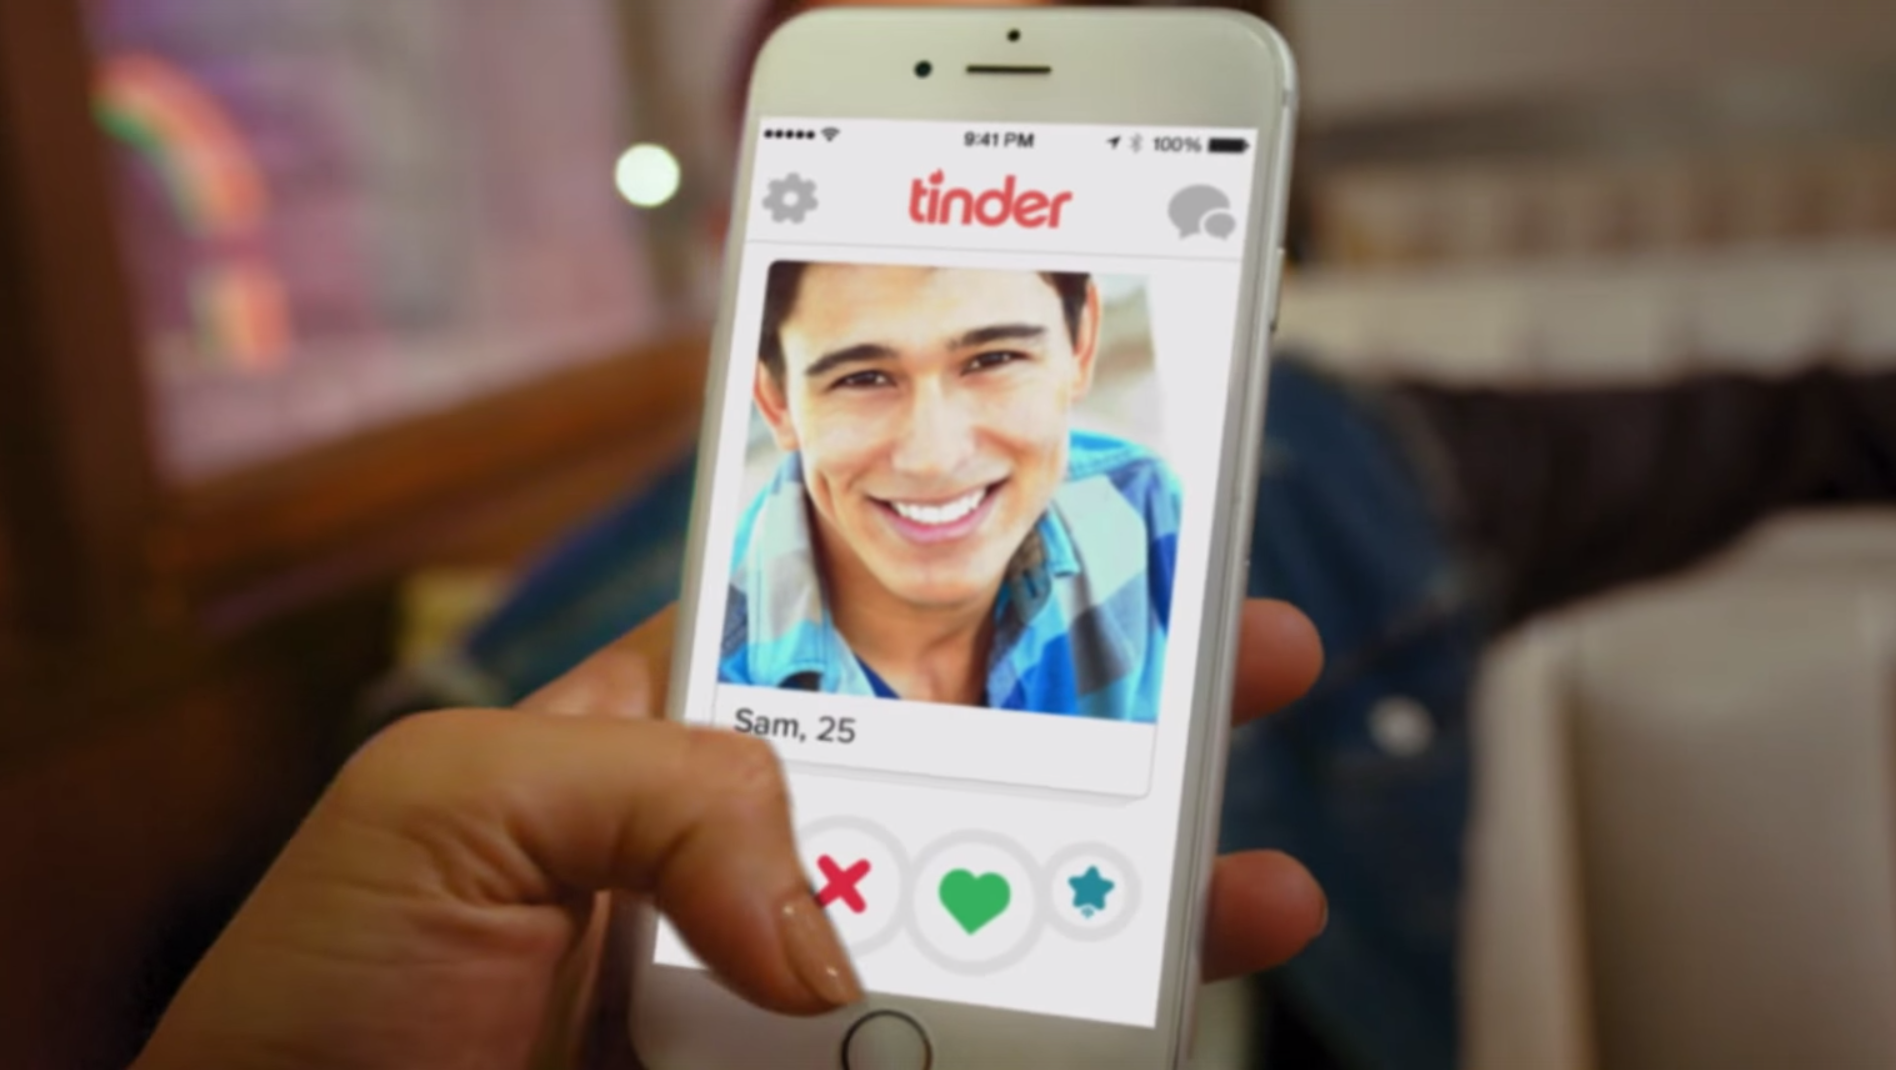 Tinder Forecasts Twofold Increase In Paid Subscribers In 2016